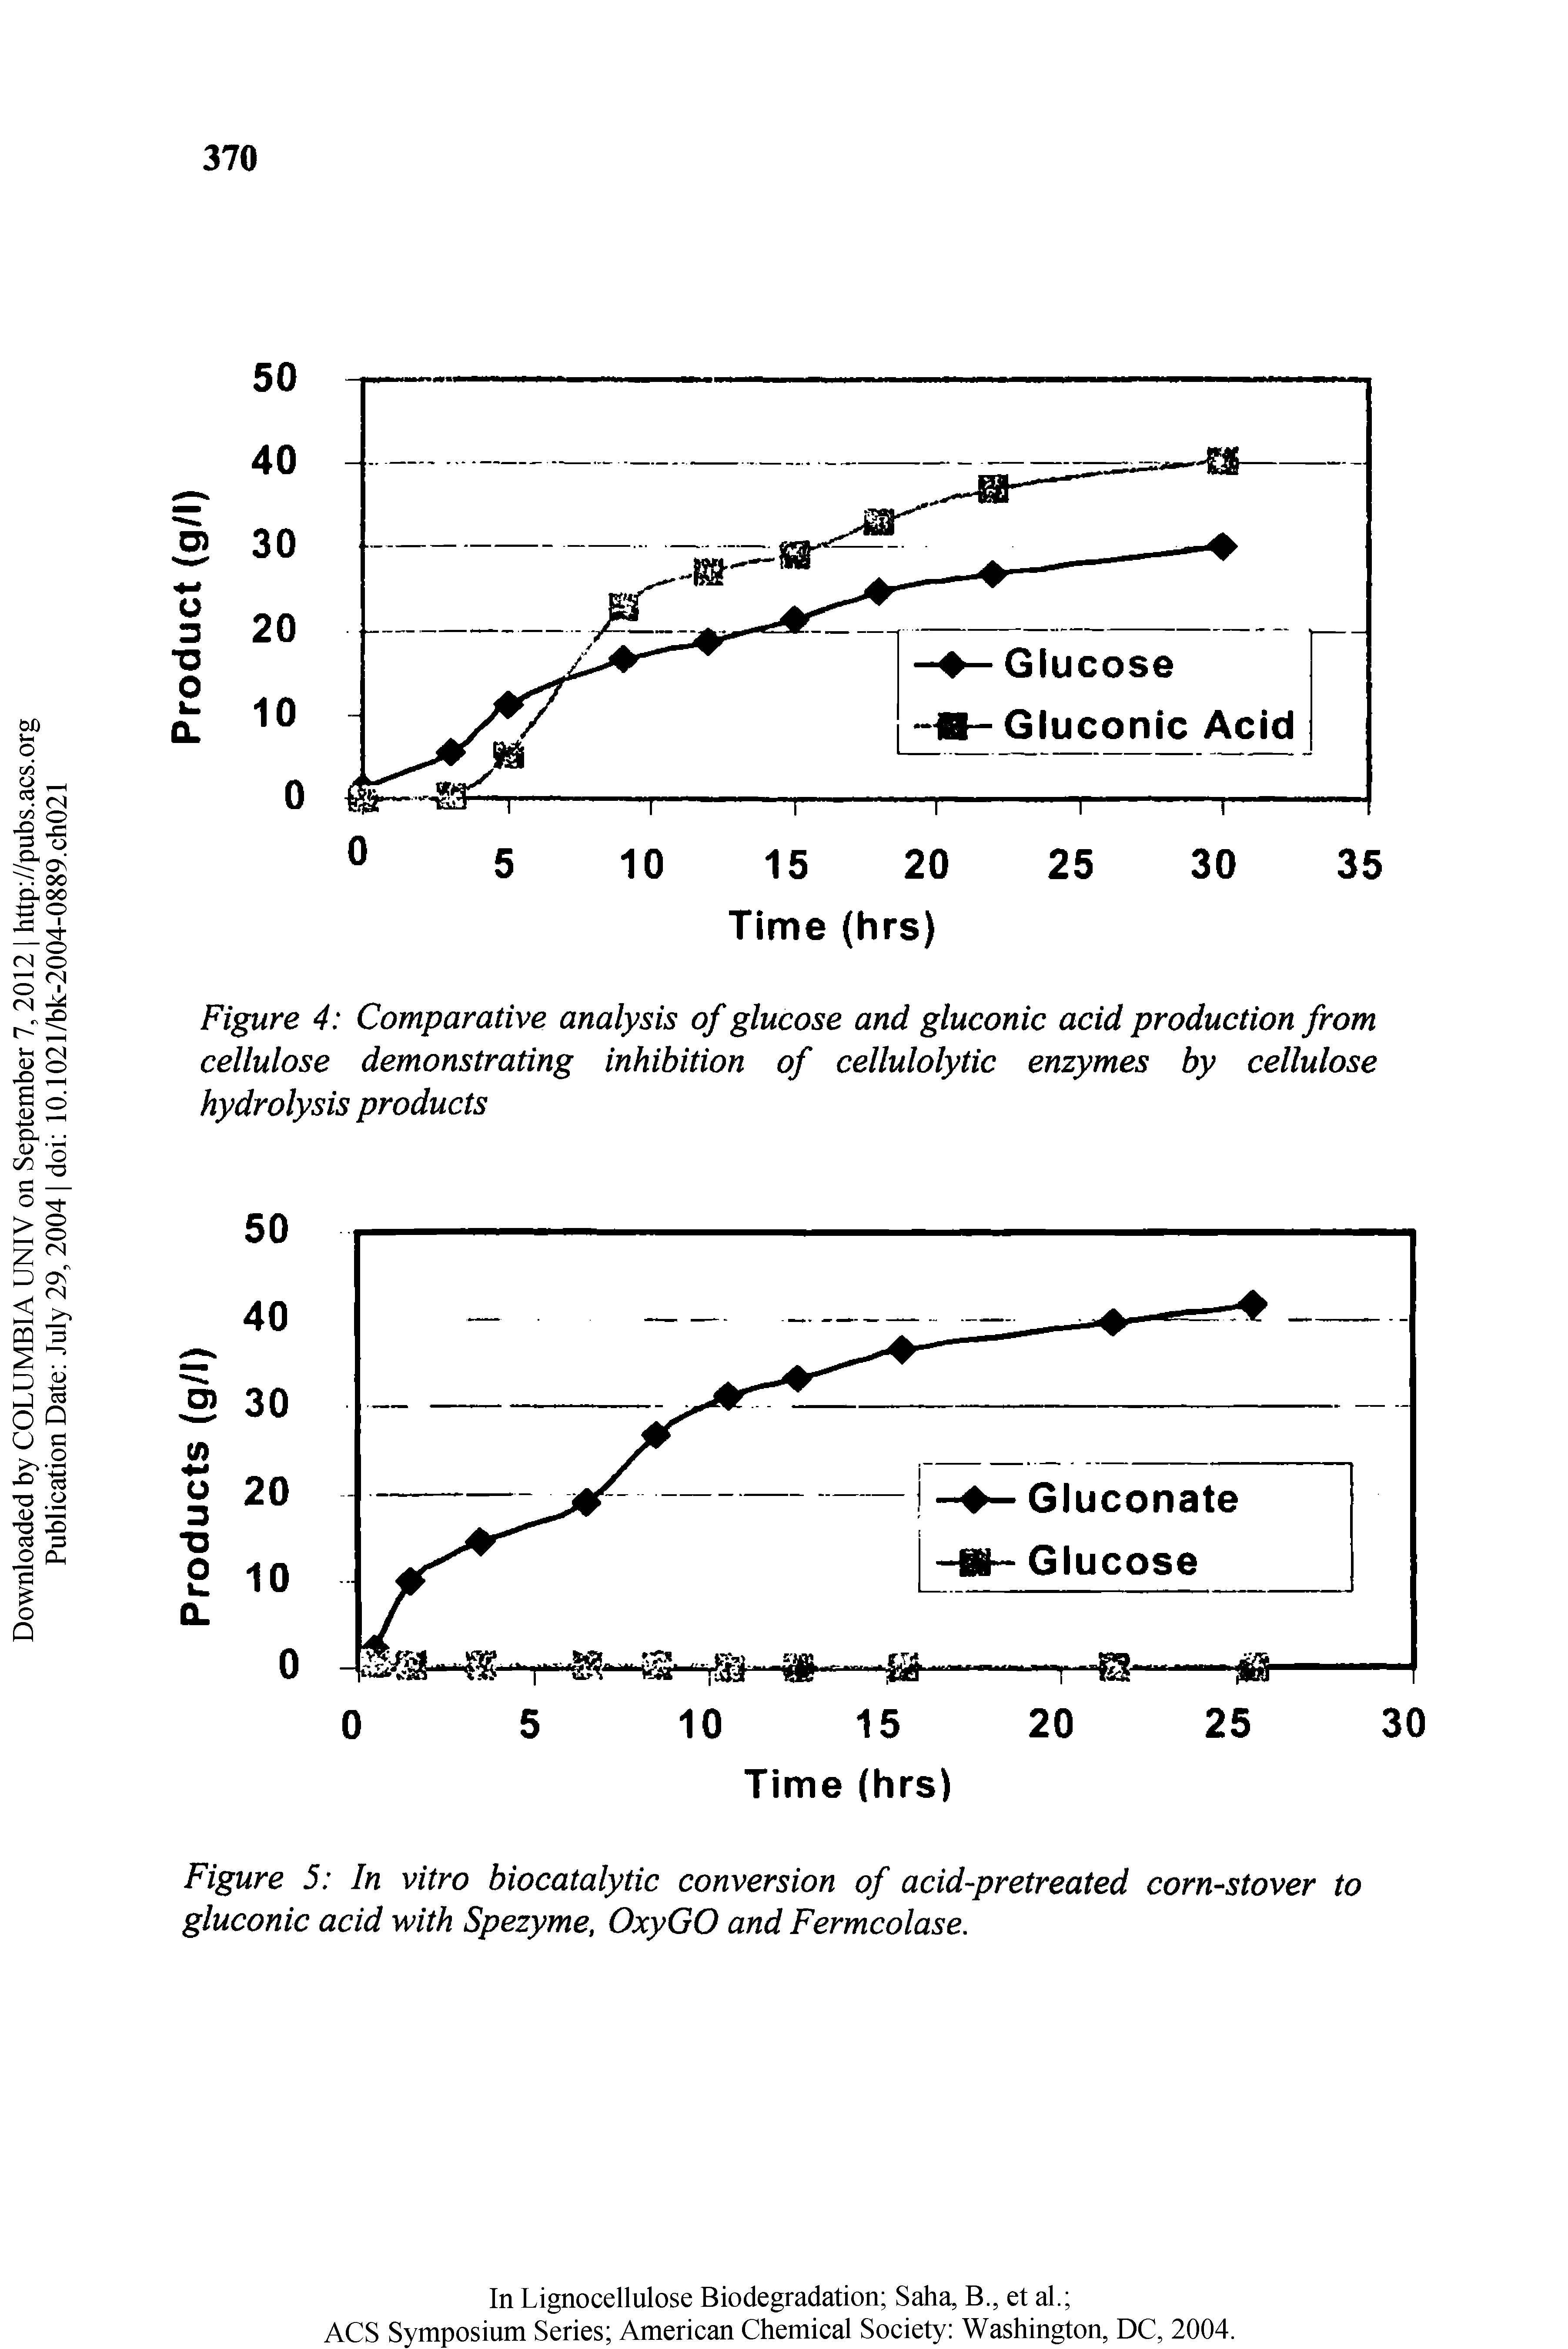 Figure 5 In vitro biocatalytic conversion of acid-pretreated corn-stover to gluconic acid with Spezyme, OxyGO and Fermcolase.